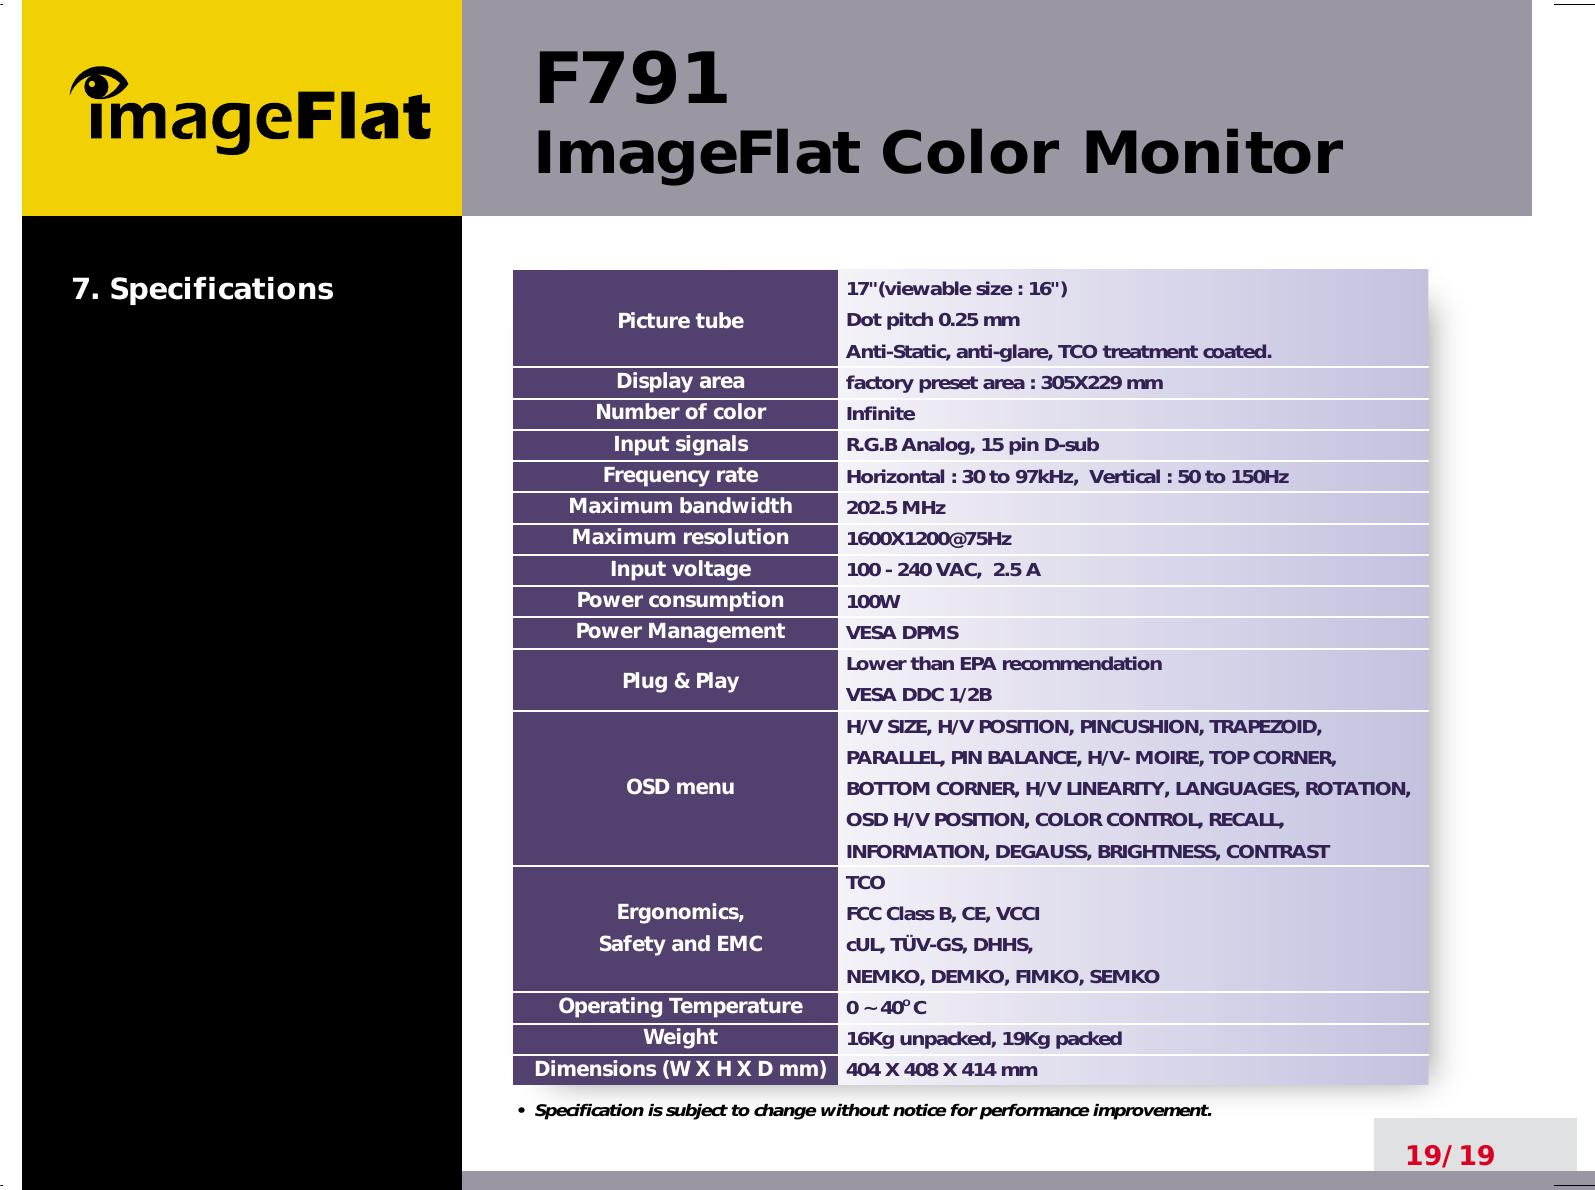 F791ImageFlat Color Monitor19/1917&quot;(viewable size : 16&quot;)Dot pitch 0.25 mmAnti-Static, anti-glare, TCO treatment coated.factory preset area : 305X229 mm InfiniteR.G.B Analog, 15 pin D-subHorizontal : 30 to 97kHz,  Vertical : 50 to 150Hz202.5 MHz1600X1200@75Hz100 - 240 VAC,  2.5 A100W  VESA DPMSLower than EPA recommendationVESA DDC 1/2BH/V SIZE, H/V POSITION, PINCUSHION, TRAPEZOID,PARALLEL, PIN BALANCE, H/V- MOIRE, TOP CORNER,BOTTOM CORNER, H/V LINEARITY, LANGUAGES, ROTATION,OSD H/V POSITION, COLOR CONTROL, RECALL,INFORMATION, DEGAUSS, BRIGHTNESS, CONTRASTTCOFCC Class B, CE, VCCIcUL, TÜV-GS, DHHS, NEMKO, DEMKO, FIMKO, SEMKO0 ~ 40O C16Kg unpacked, 19Kg packed404 X 408 X 414 mmPicture tubeDisplay areaNumber of colorInput signalsFrequency rateMaximum bandwidthMaximum resolutionInput voltagePower consumptionPower ManagementPlug &amp; PlayOSD menuErgonomics,Safety and EMCOperating TemperatureWeightDimensions (W X H X D mm)•  Specification is subject to change without notice for performance improvement.7. Specifications